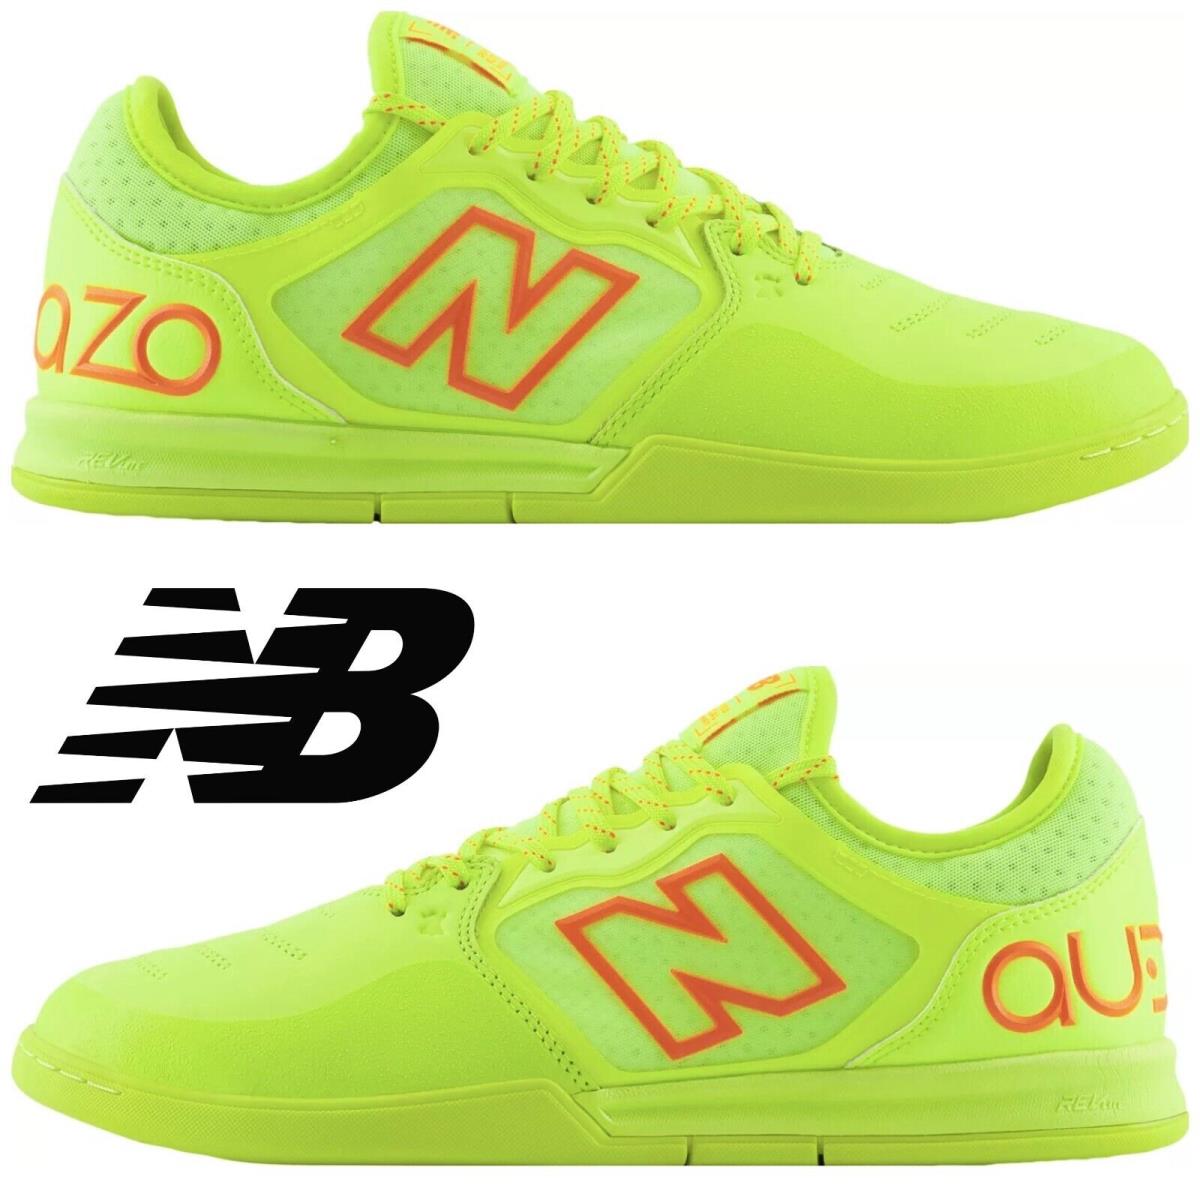 New Balance Men`s Audazo V5+ Pro Indoor Soccer Shoes Running Sport Sneakers